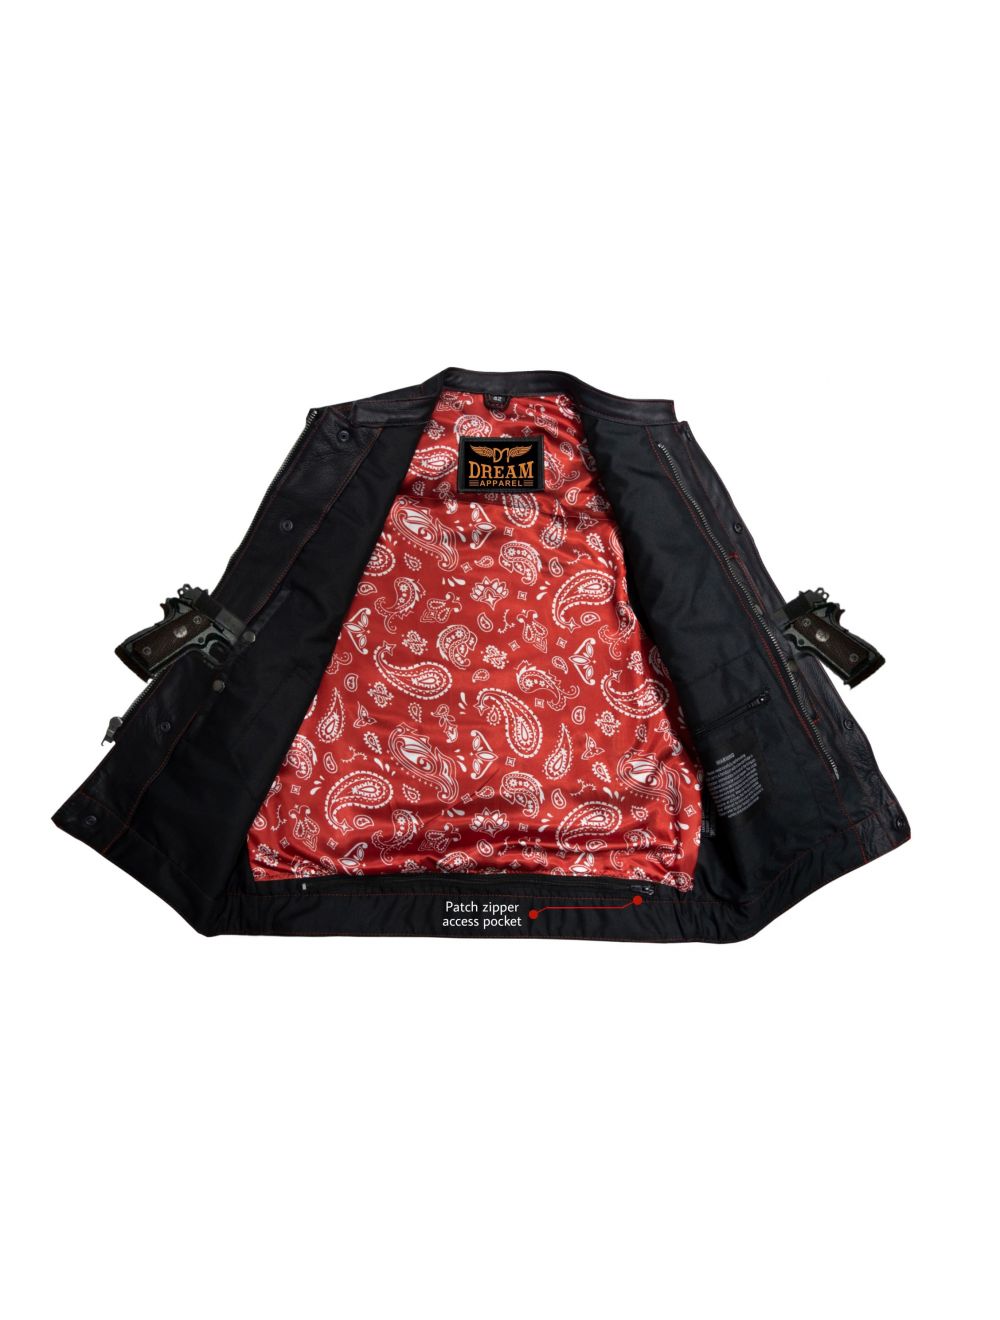 Men's Leather Vest with Red Paisley Liner